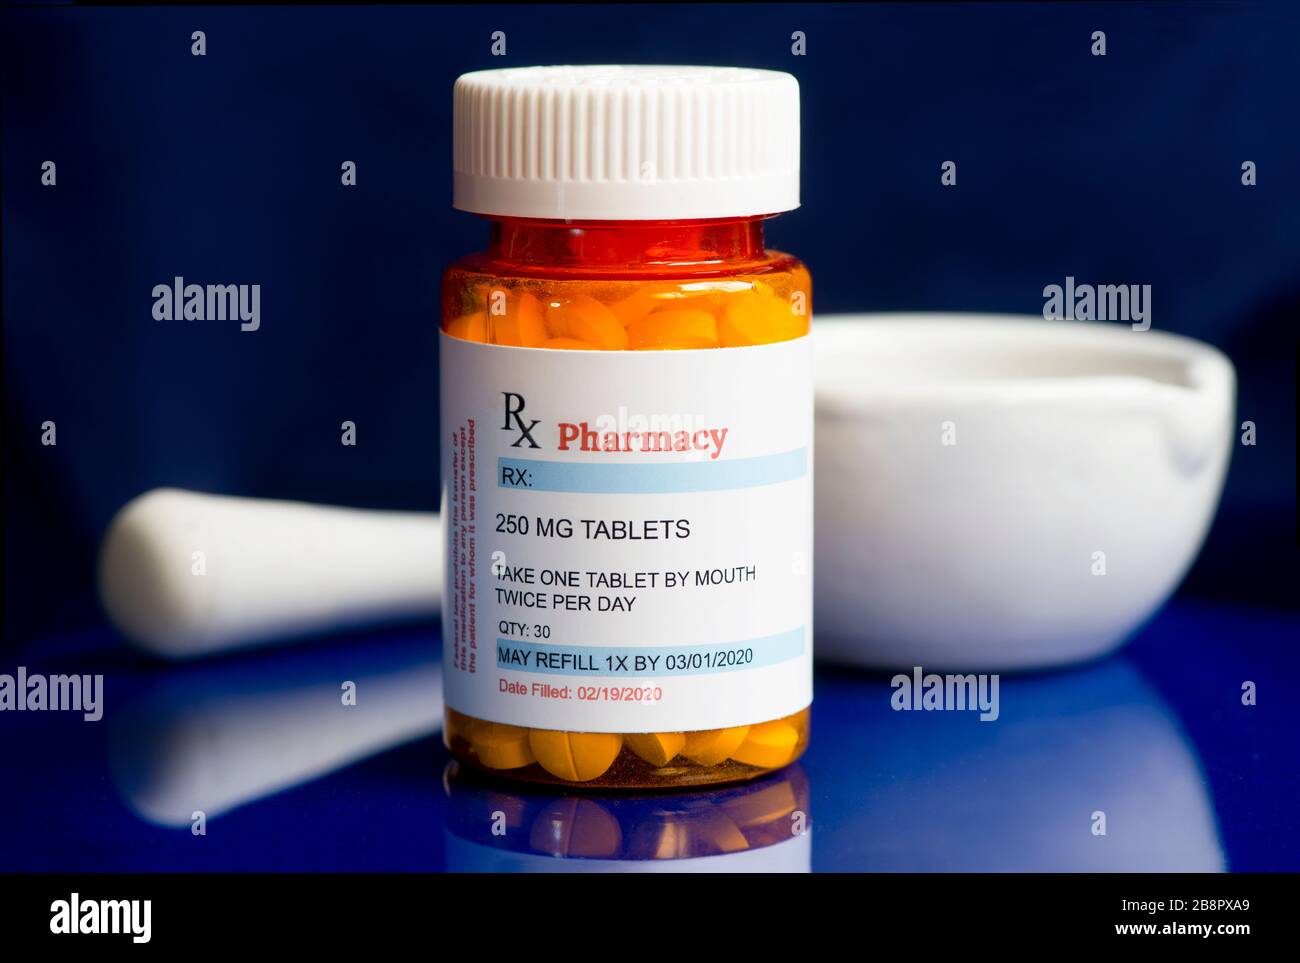 Generic prescription bottle with tablets and mortar and pestle on dark blue background. Stock Photo